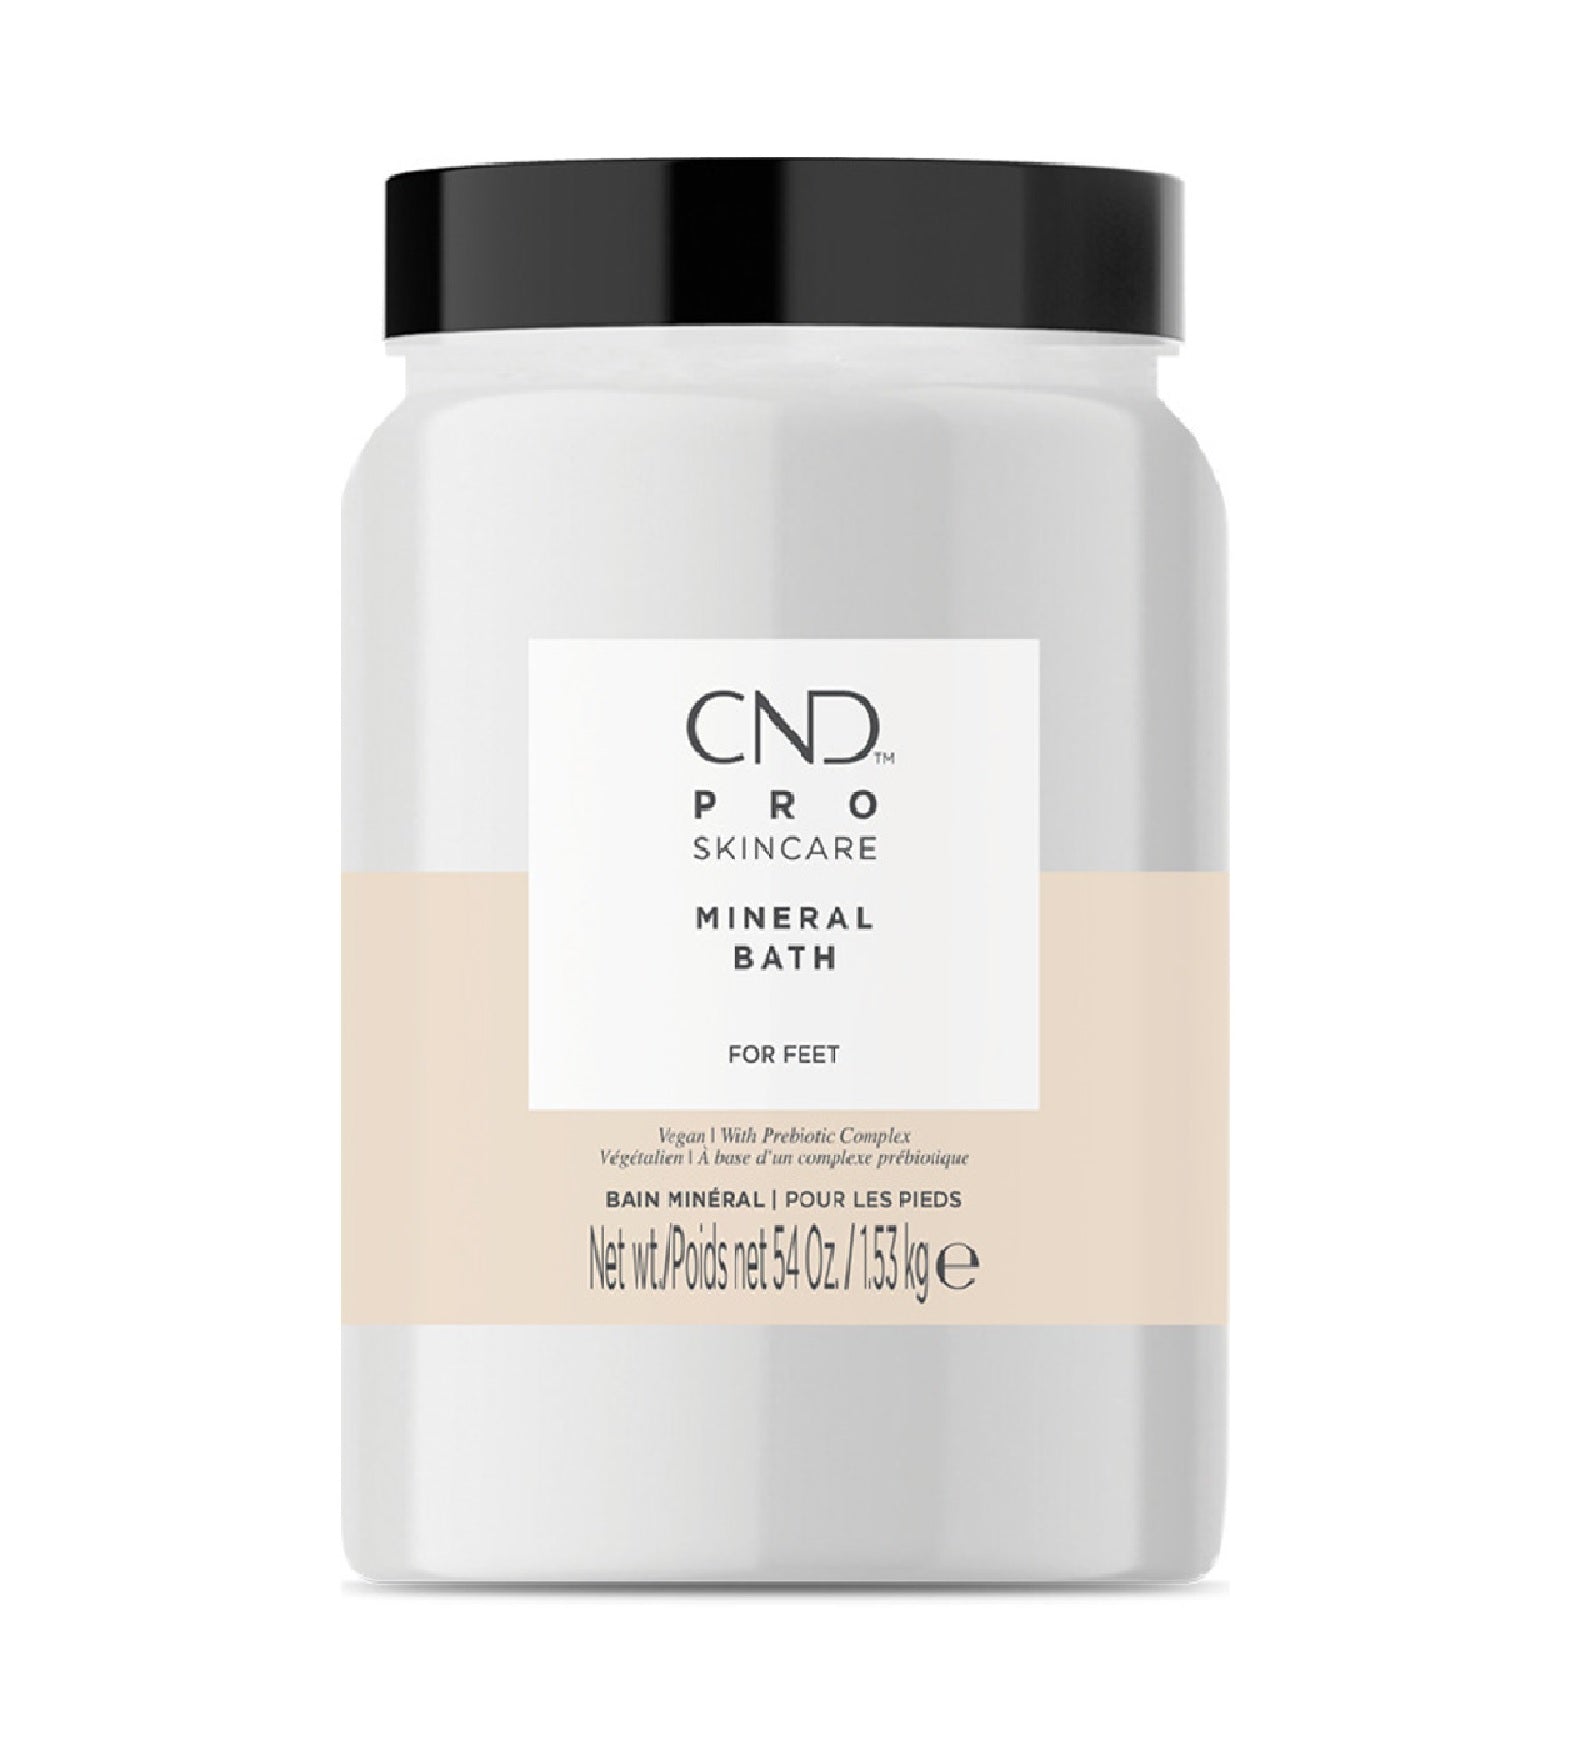 CND Pro Skincare Mineral Bath for Feet